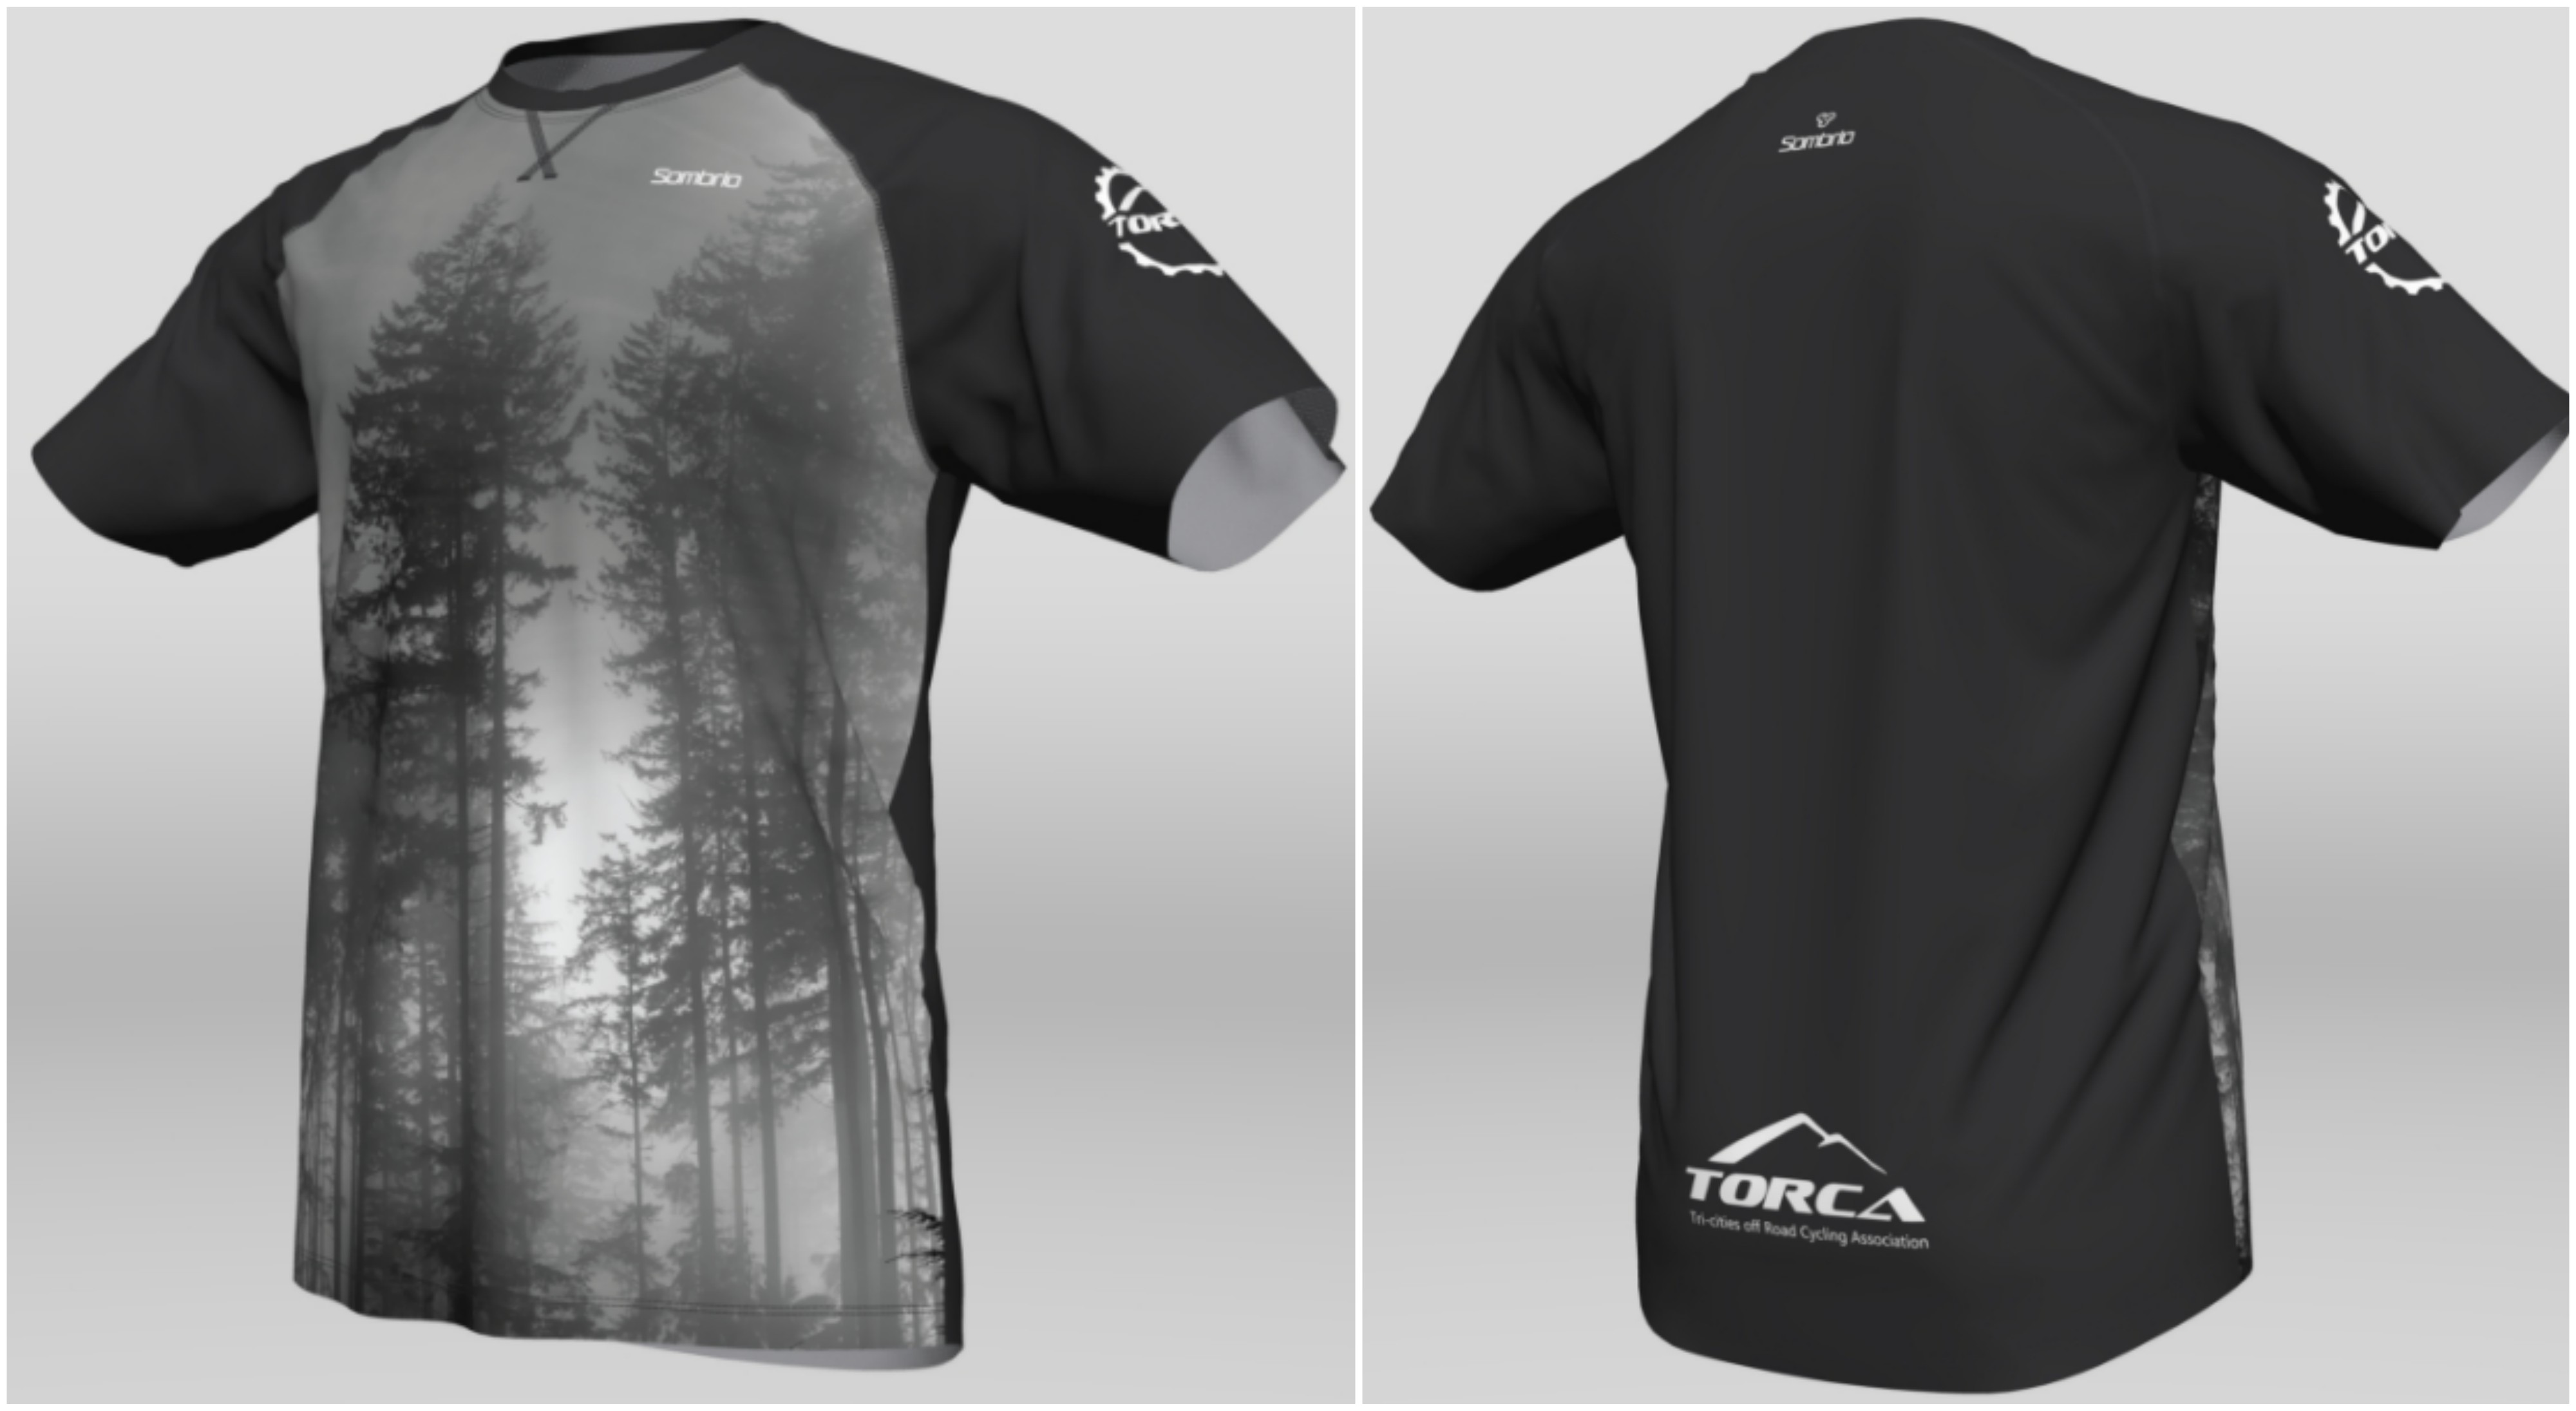 TORCA Limited Special Edition bike jersey